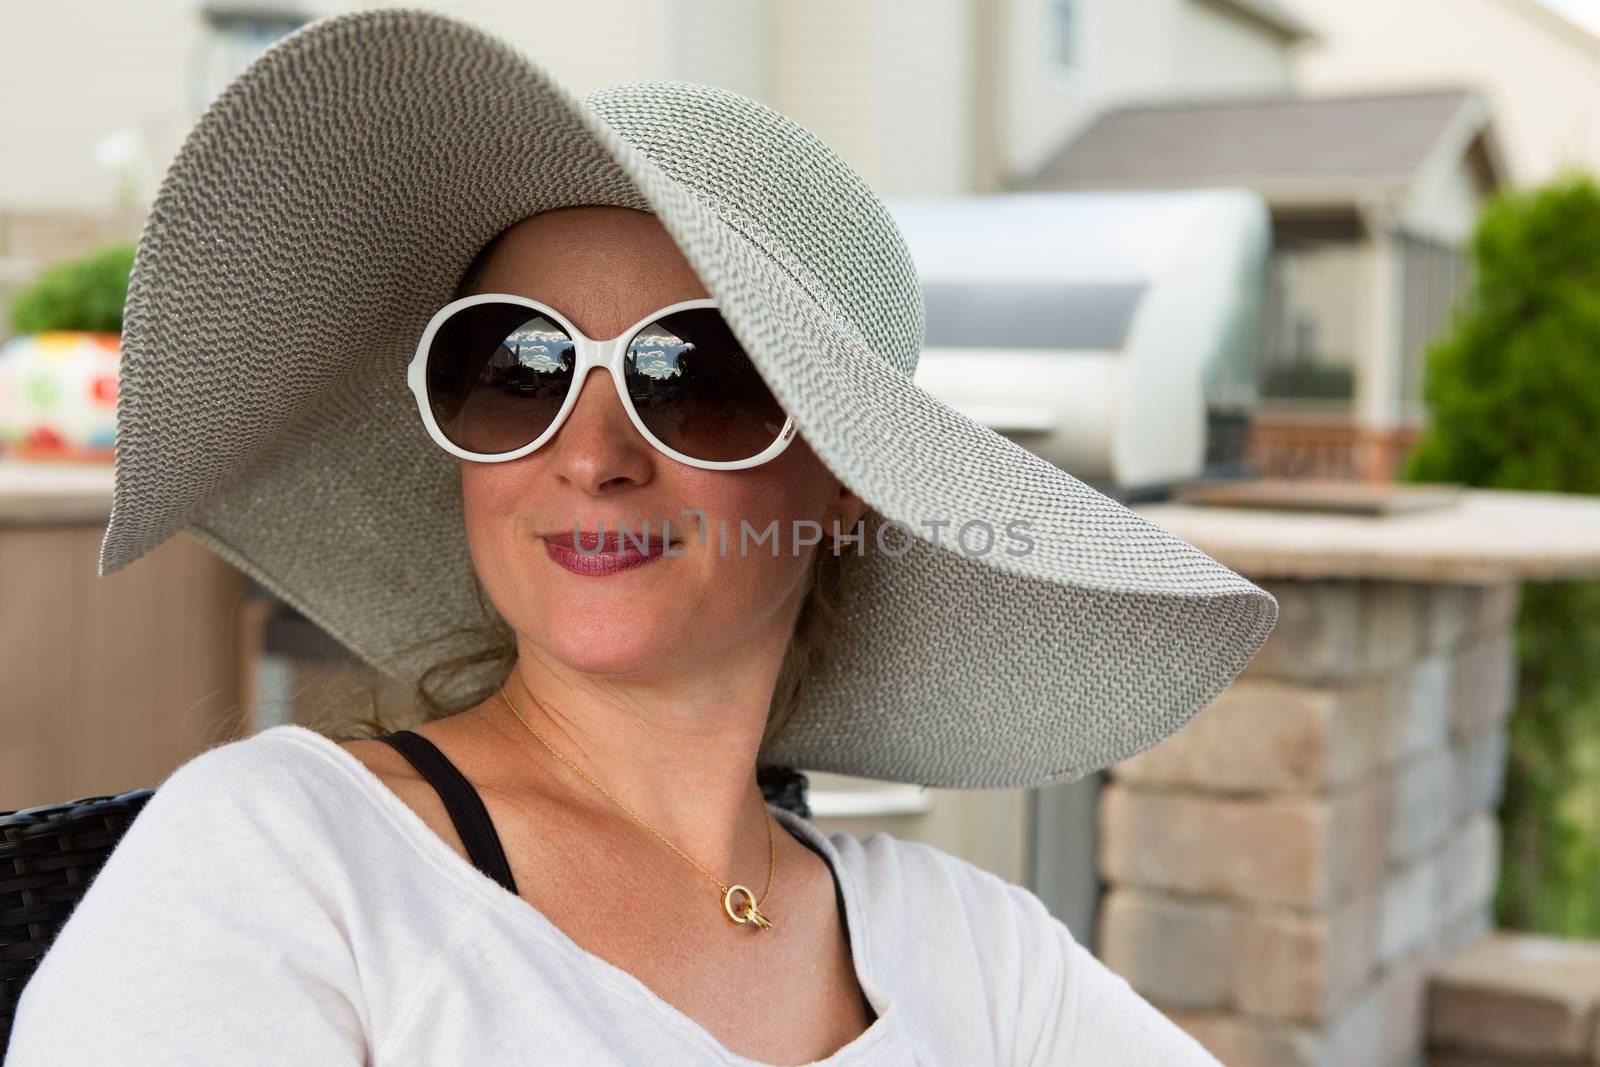 Head and Shoulders Close Up of Joyful Woman Wearing Large Brimmed Sun Hat and Sunglasses Smiling and Looking to the Side Outdoors on Backyard Patio on Sunny Day